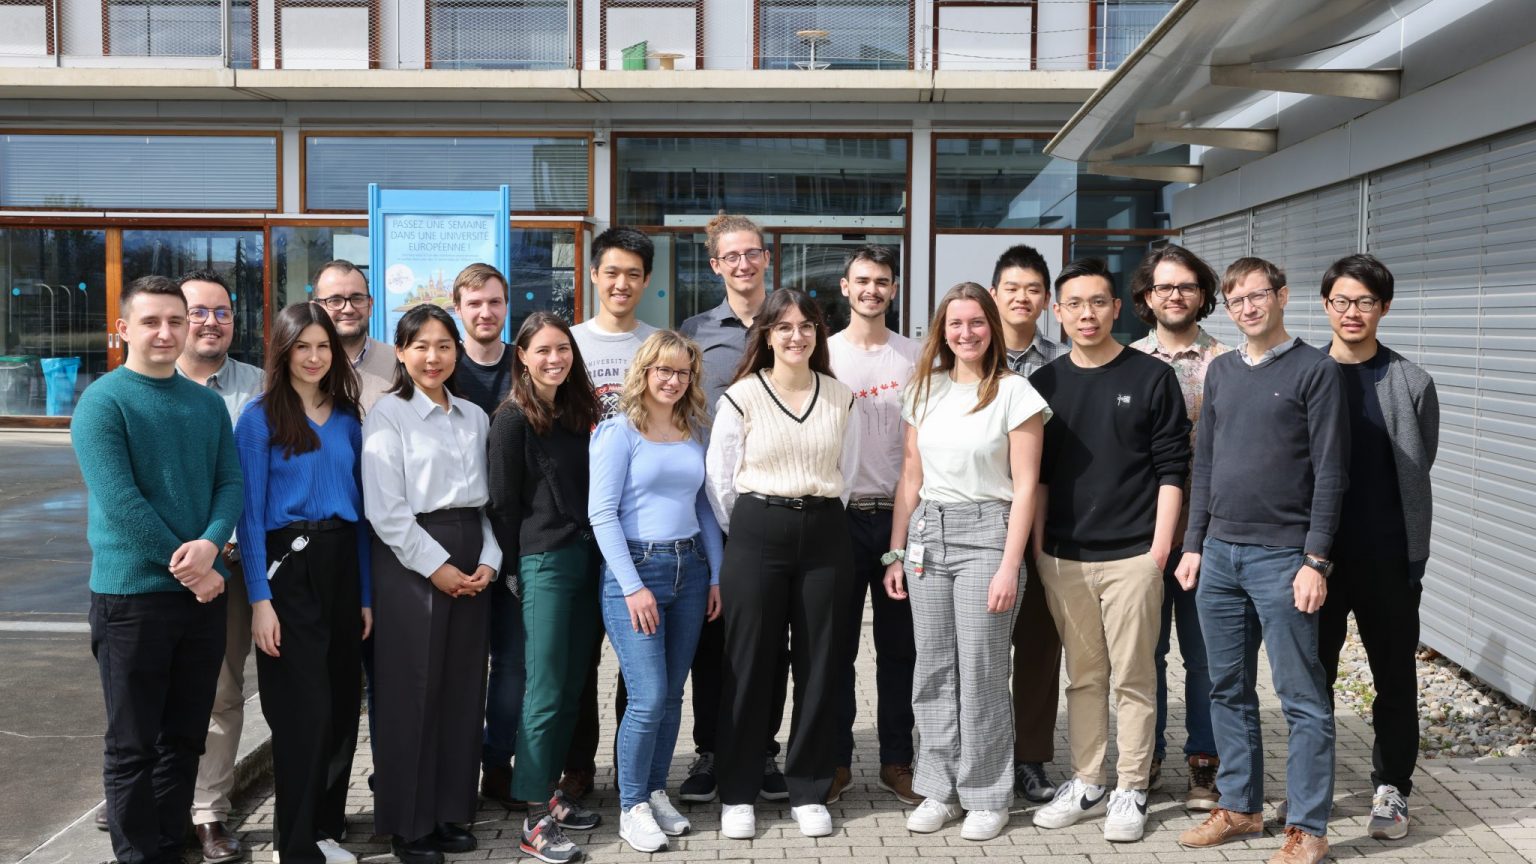 The group in Spring 2024. From left to right, back to front: Pierre, Stefano, Alexandre, Josh, Carlo, Clément, Xingyu, Duncan, Yuji, Vladyslav, Helena, Najung, Christine, Diana, Emma, Daphne, Tin, Jerome.